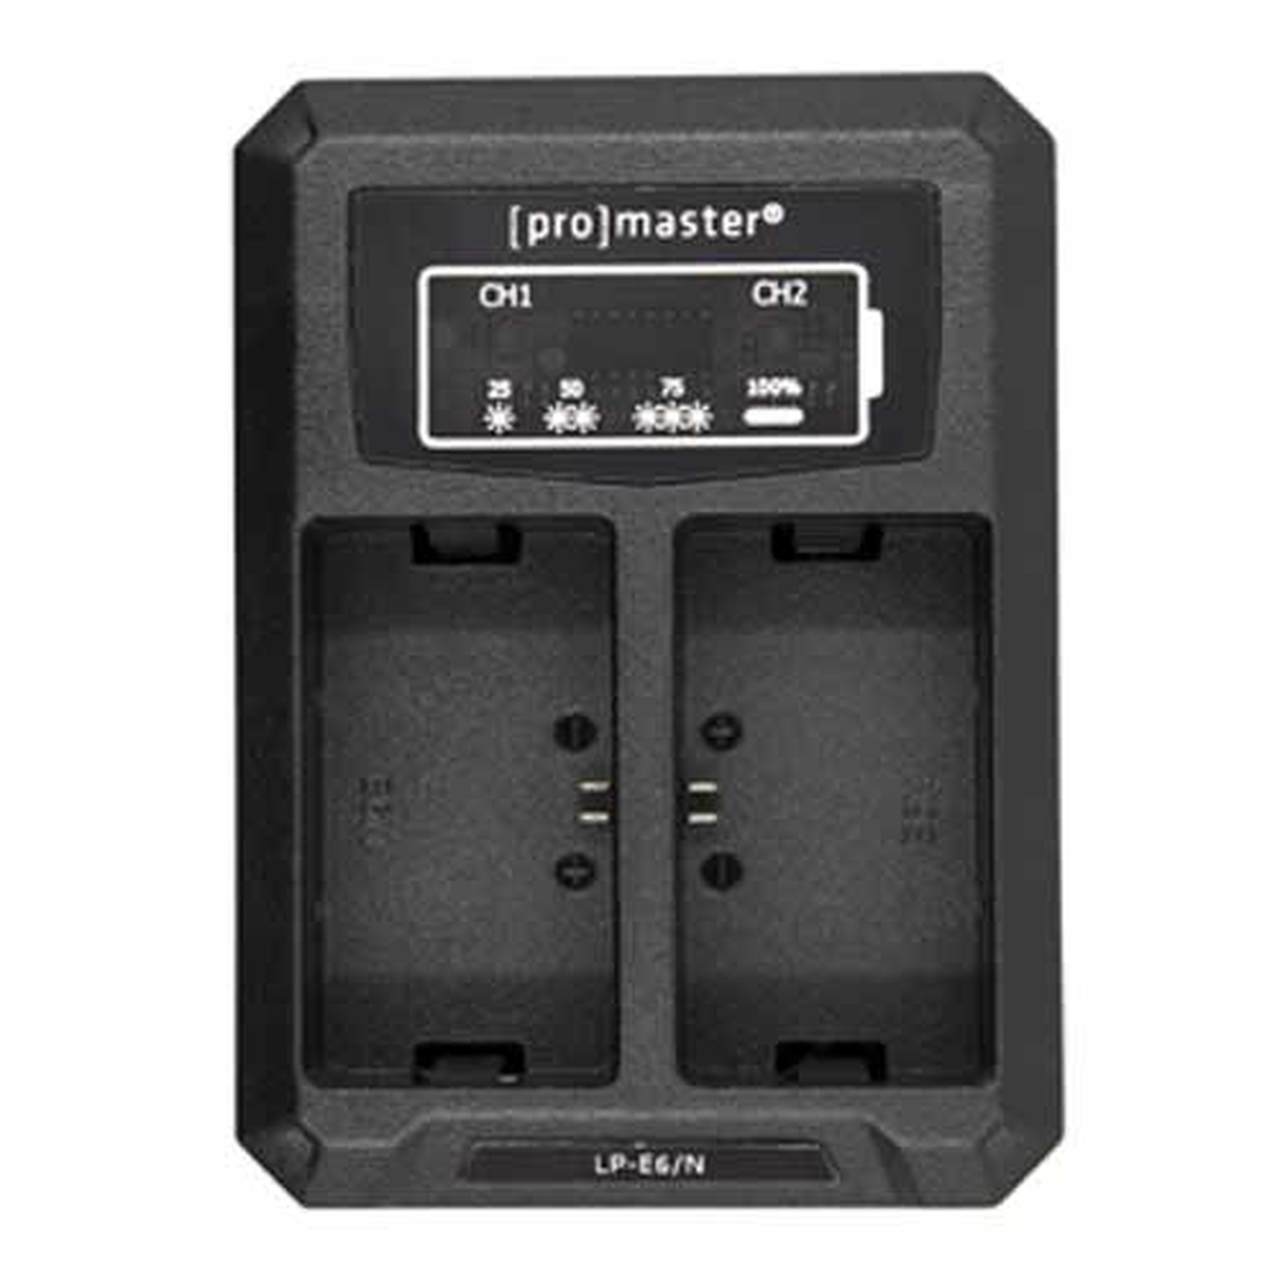 Promaster 4560 Dually Charger for Canon LP-E6(N)